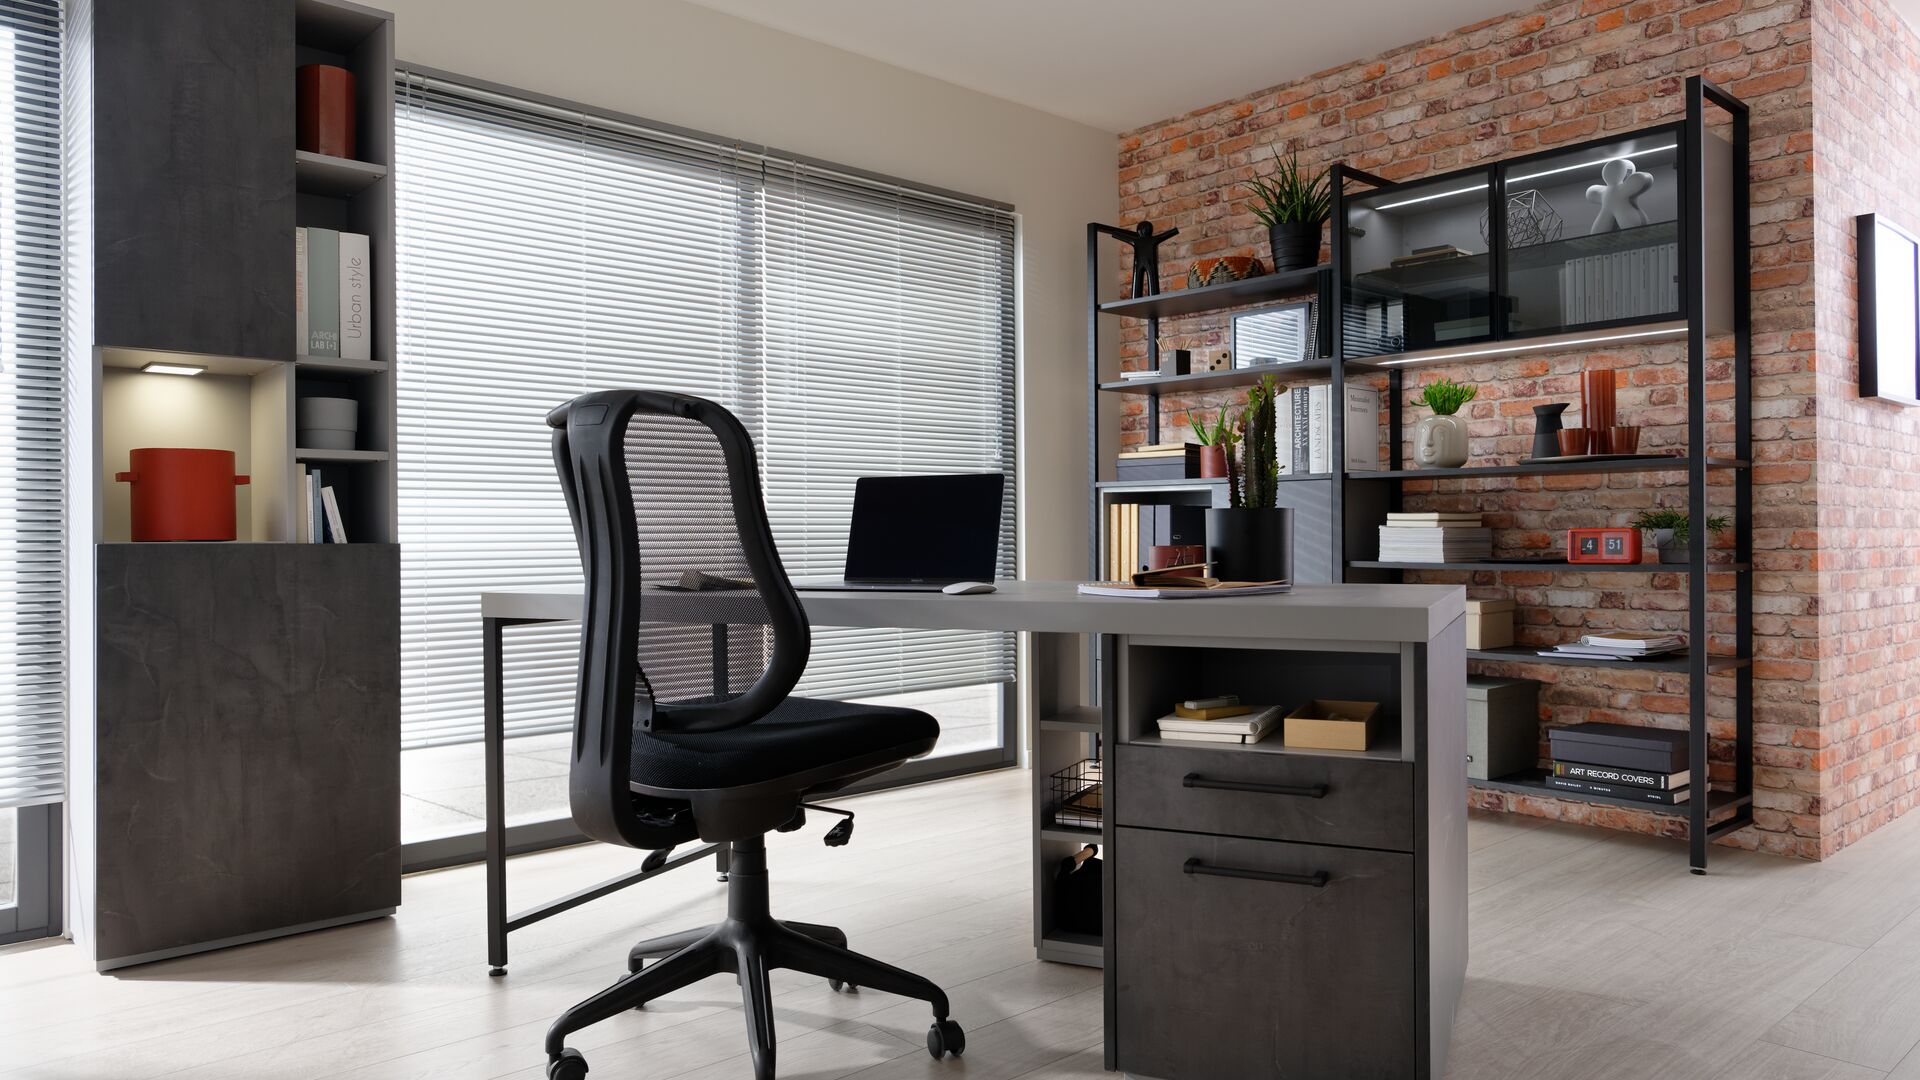 Architectural-style desk with black metal shelves and grey units